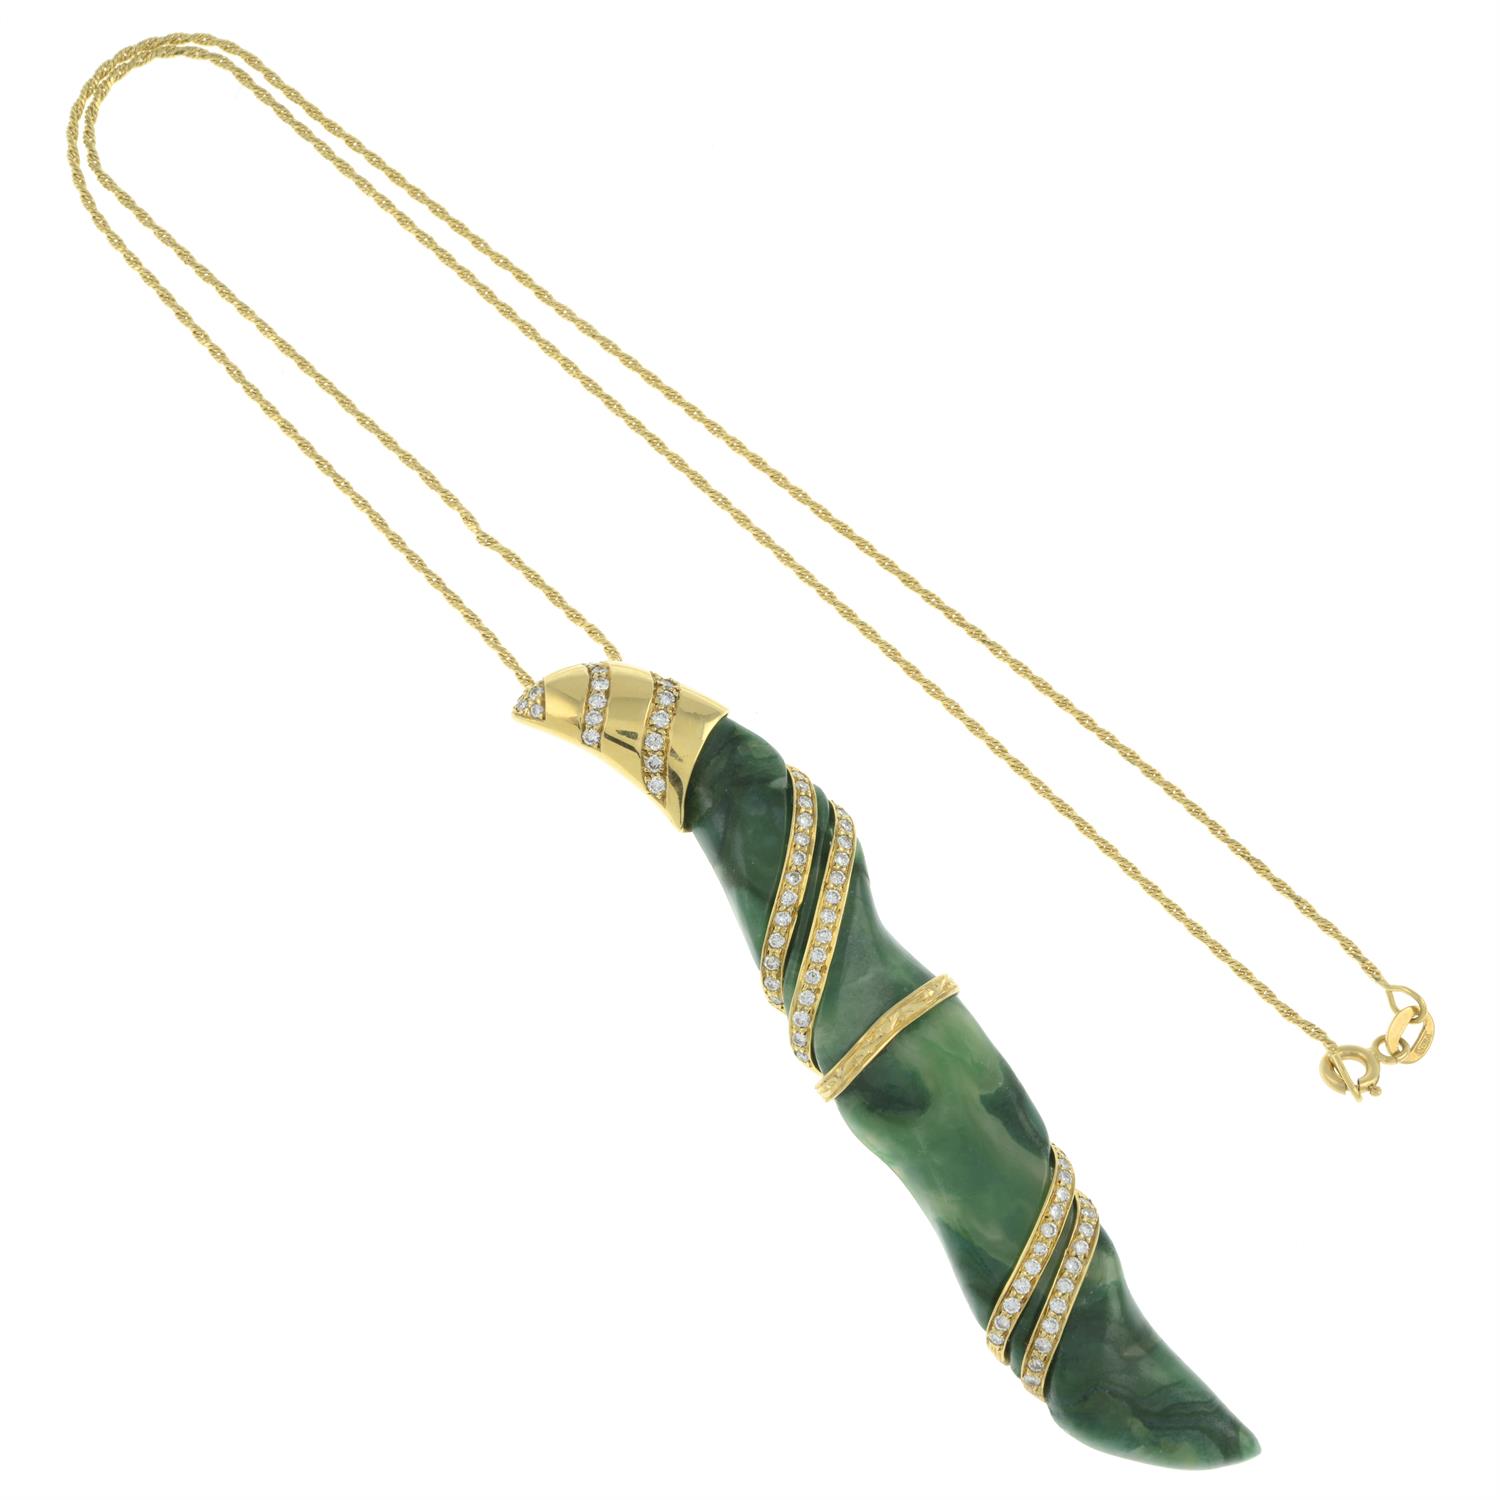 18ct gold diamond and green stone pendant, with chain - Image 4 of 5